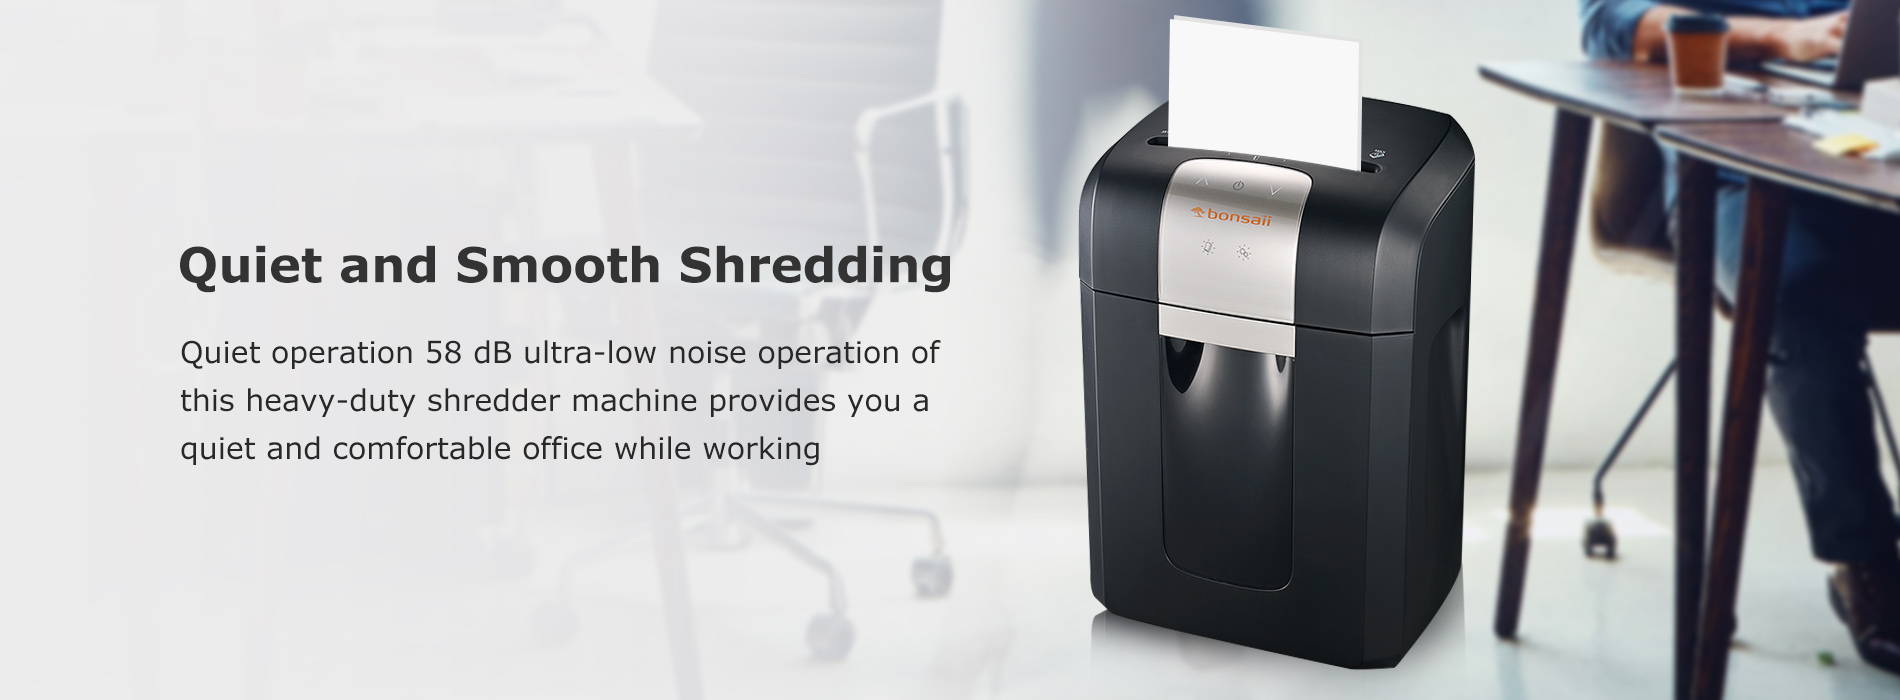 Quiet and Smooth Shredding Quiet operation 58 dB ultra-low noise operation of this heavy-duty shredder machine provides you a quiet and comfortable office while working